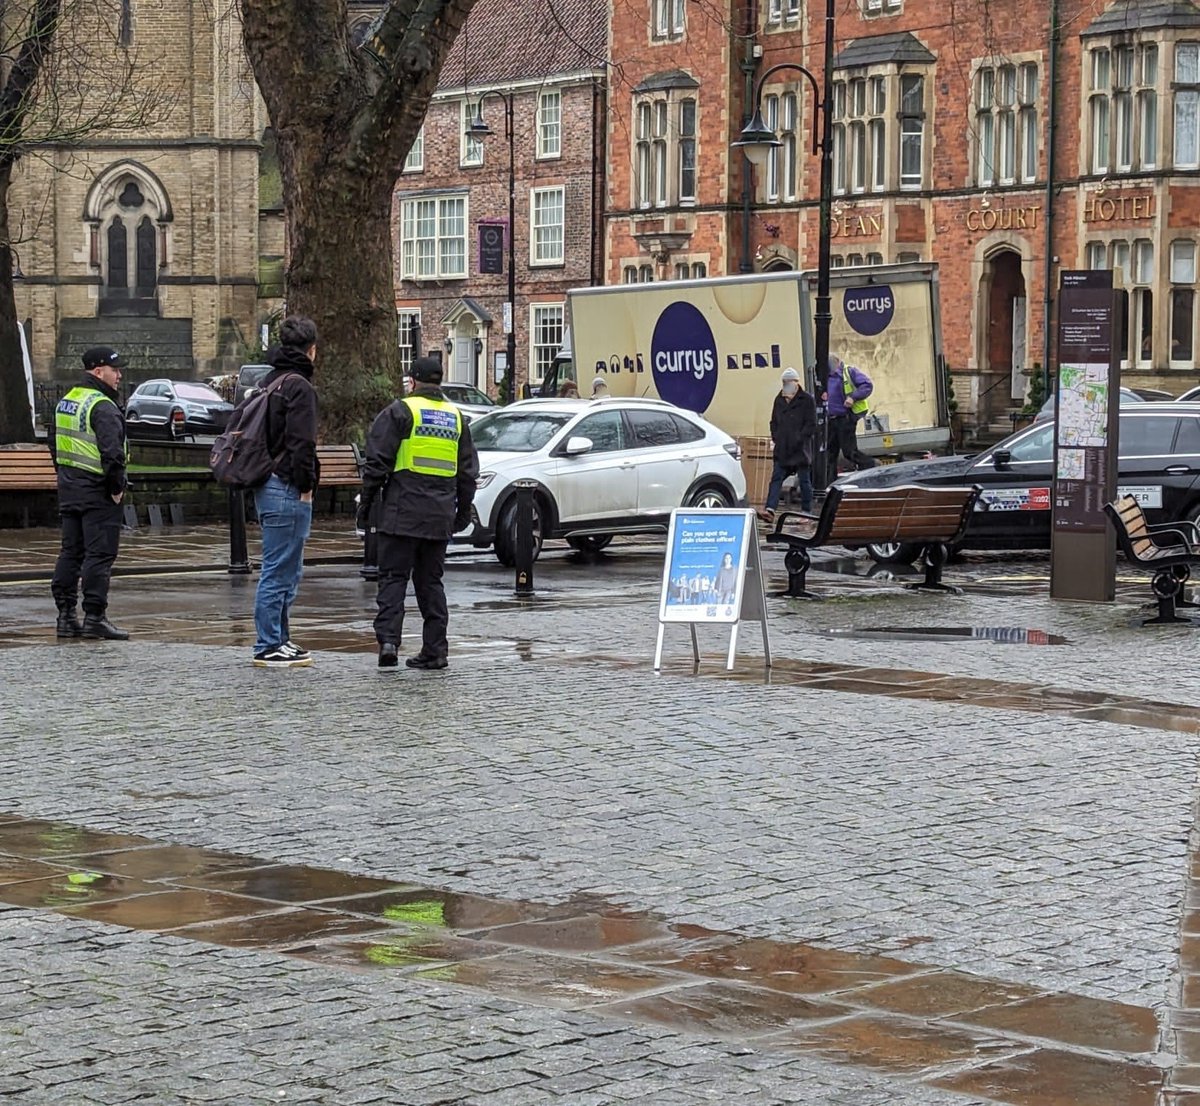 Pouring rain on Friday did not stop our Project Servator officers from popping up in York!🌧️ They pop up anywhere, at anytime. When you see us, come and say hello. Stay vigilant, report anything suspicious. More info on web. #ProjectServator #TogetherWeveGotItCovered